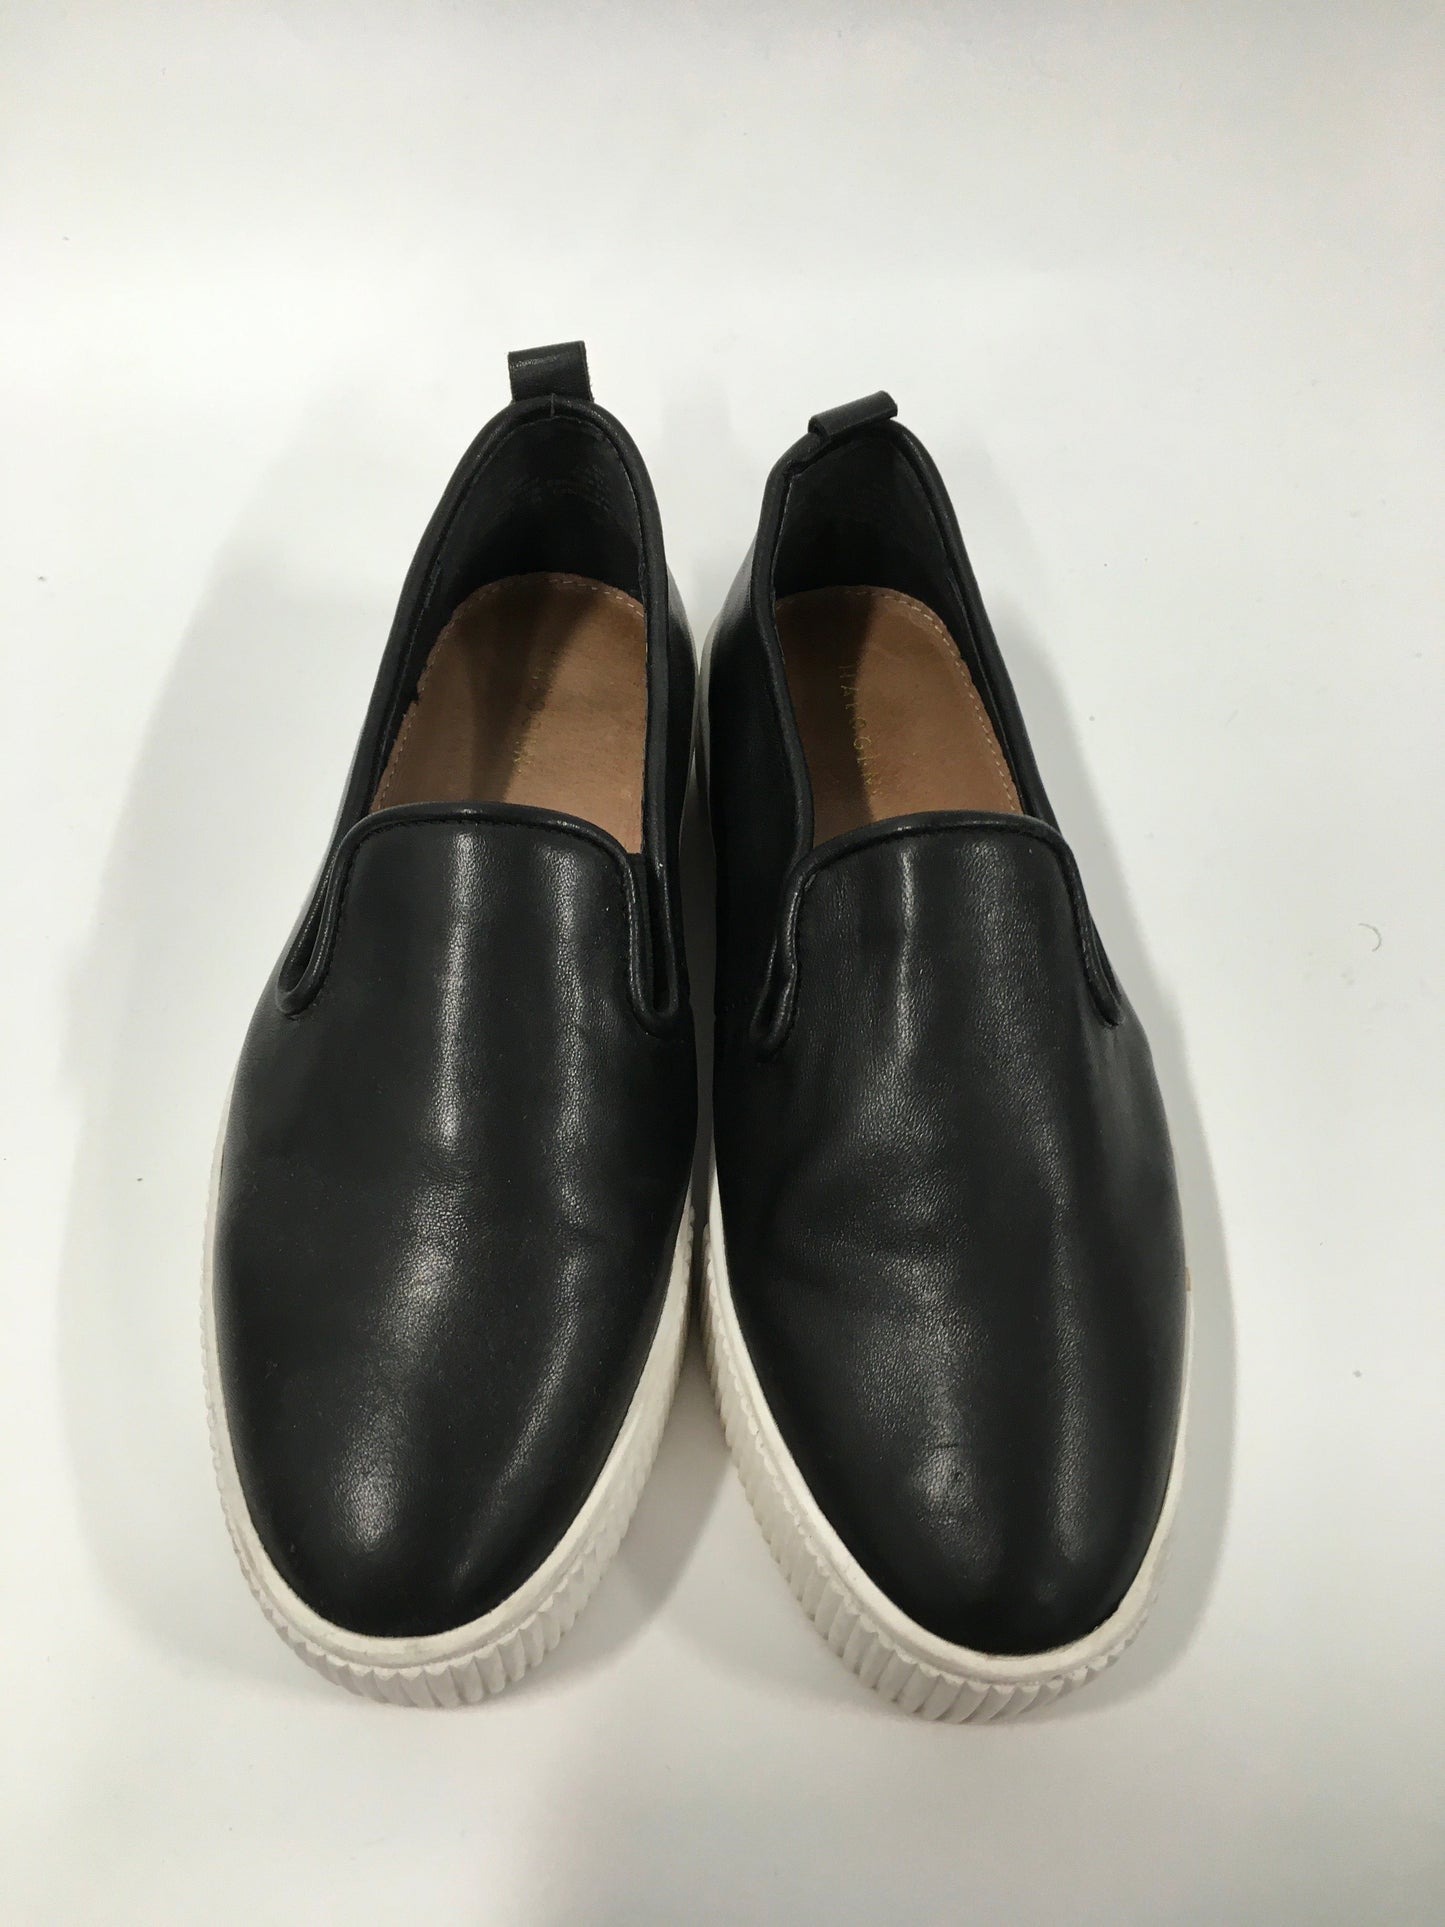 Leather Shoes Flats Other Halogen, Size 6